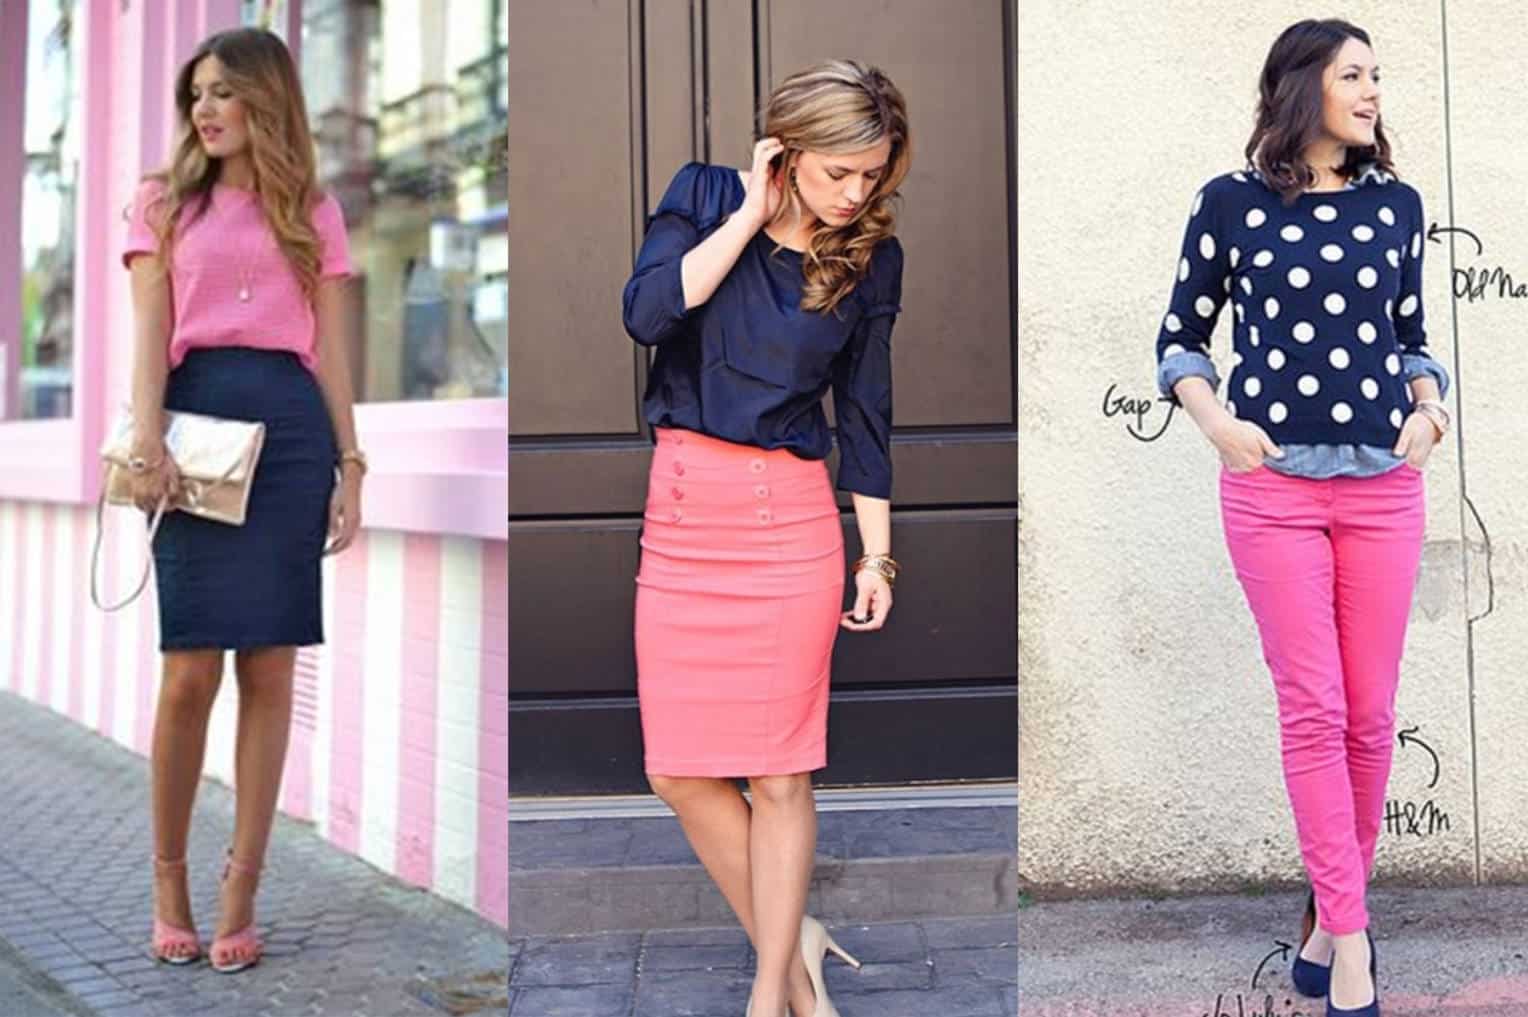 what colors go with navy blue clothes